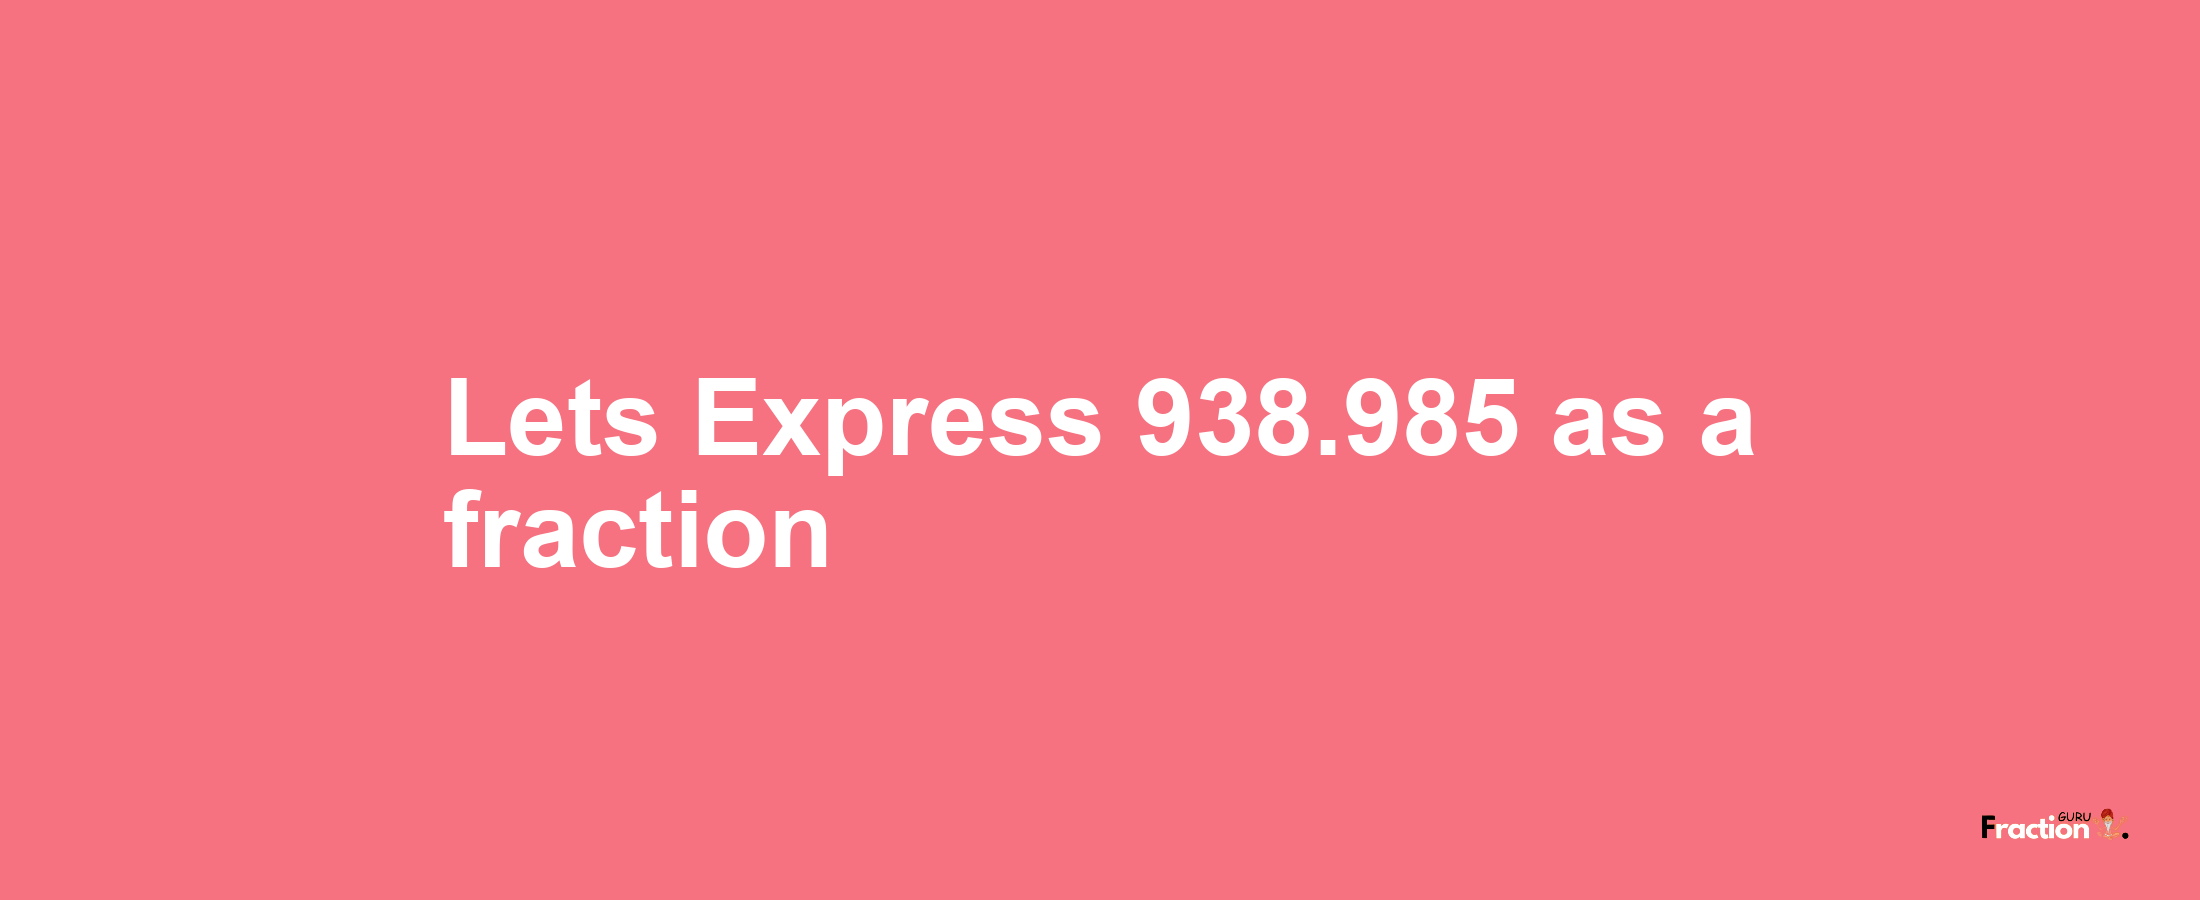 Lets Express 938.985 as afraction